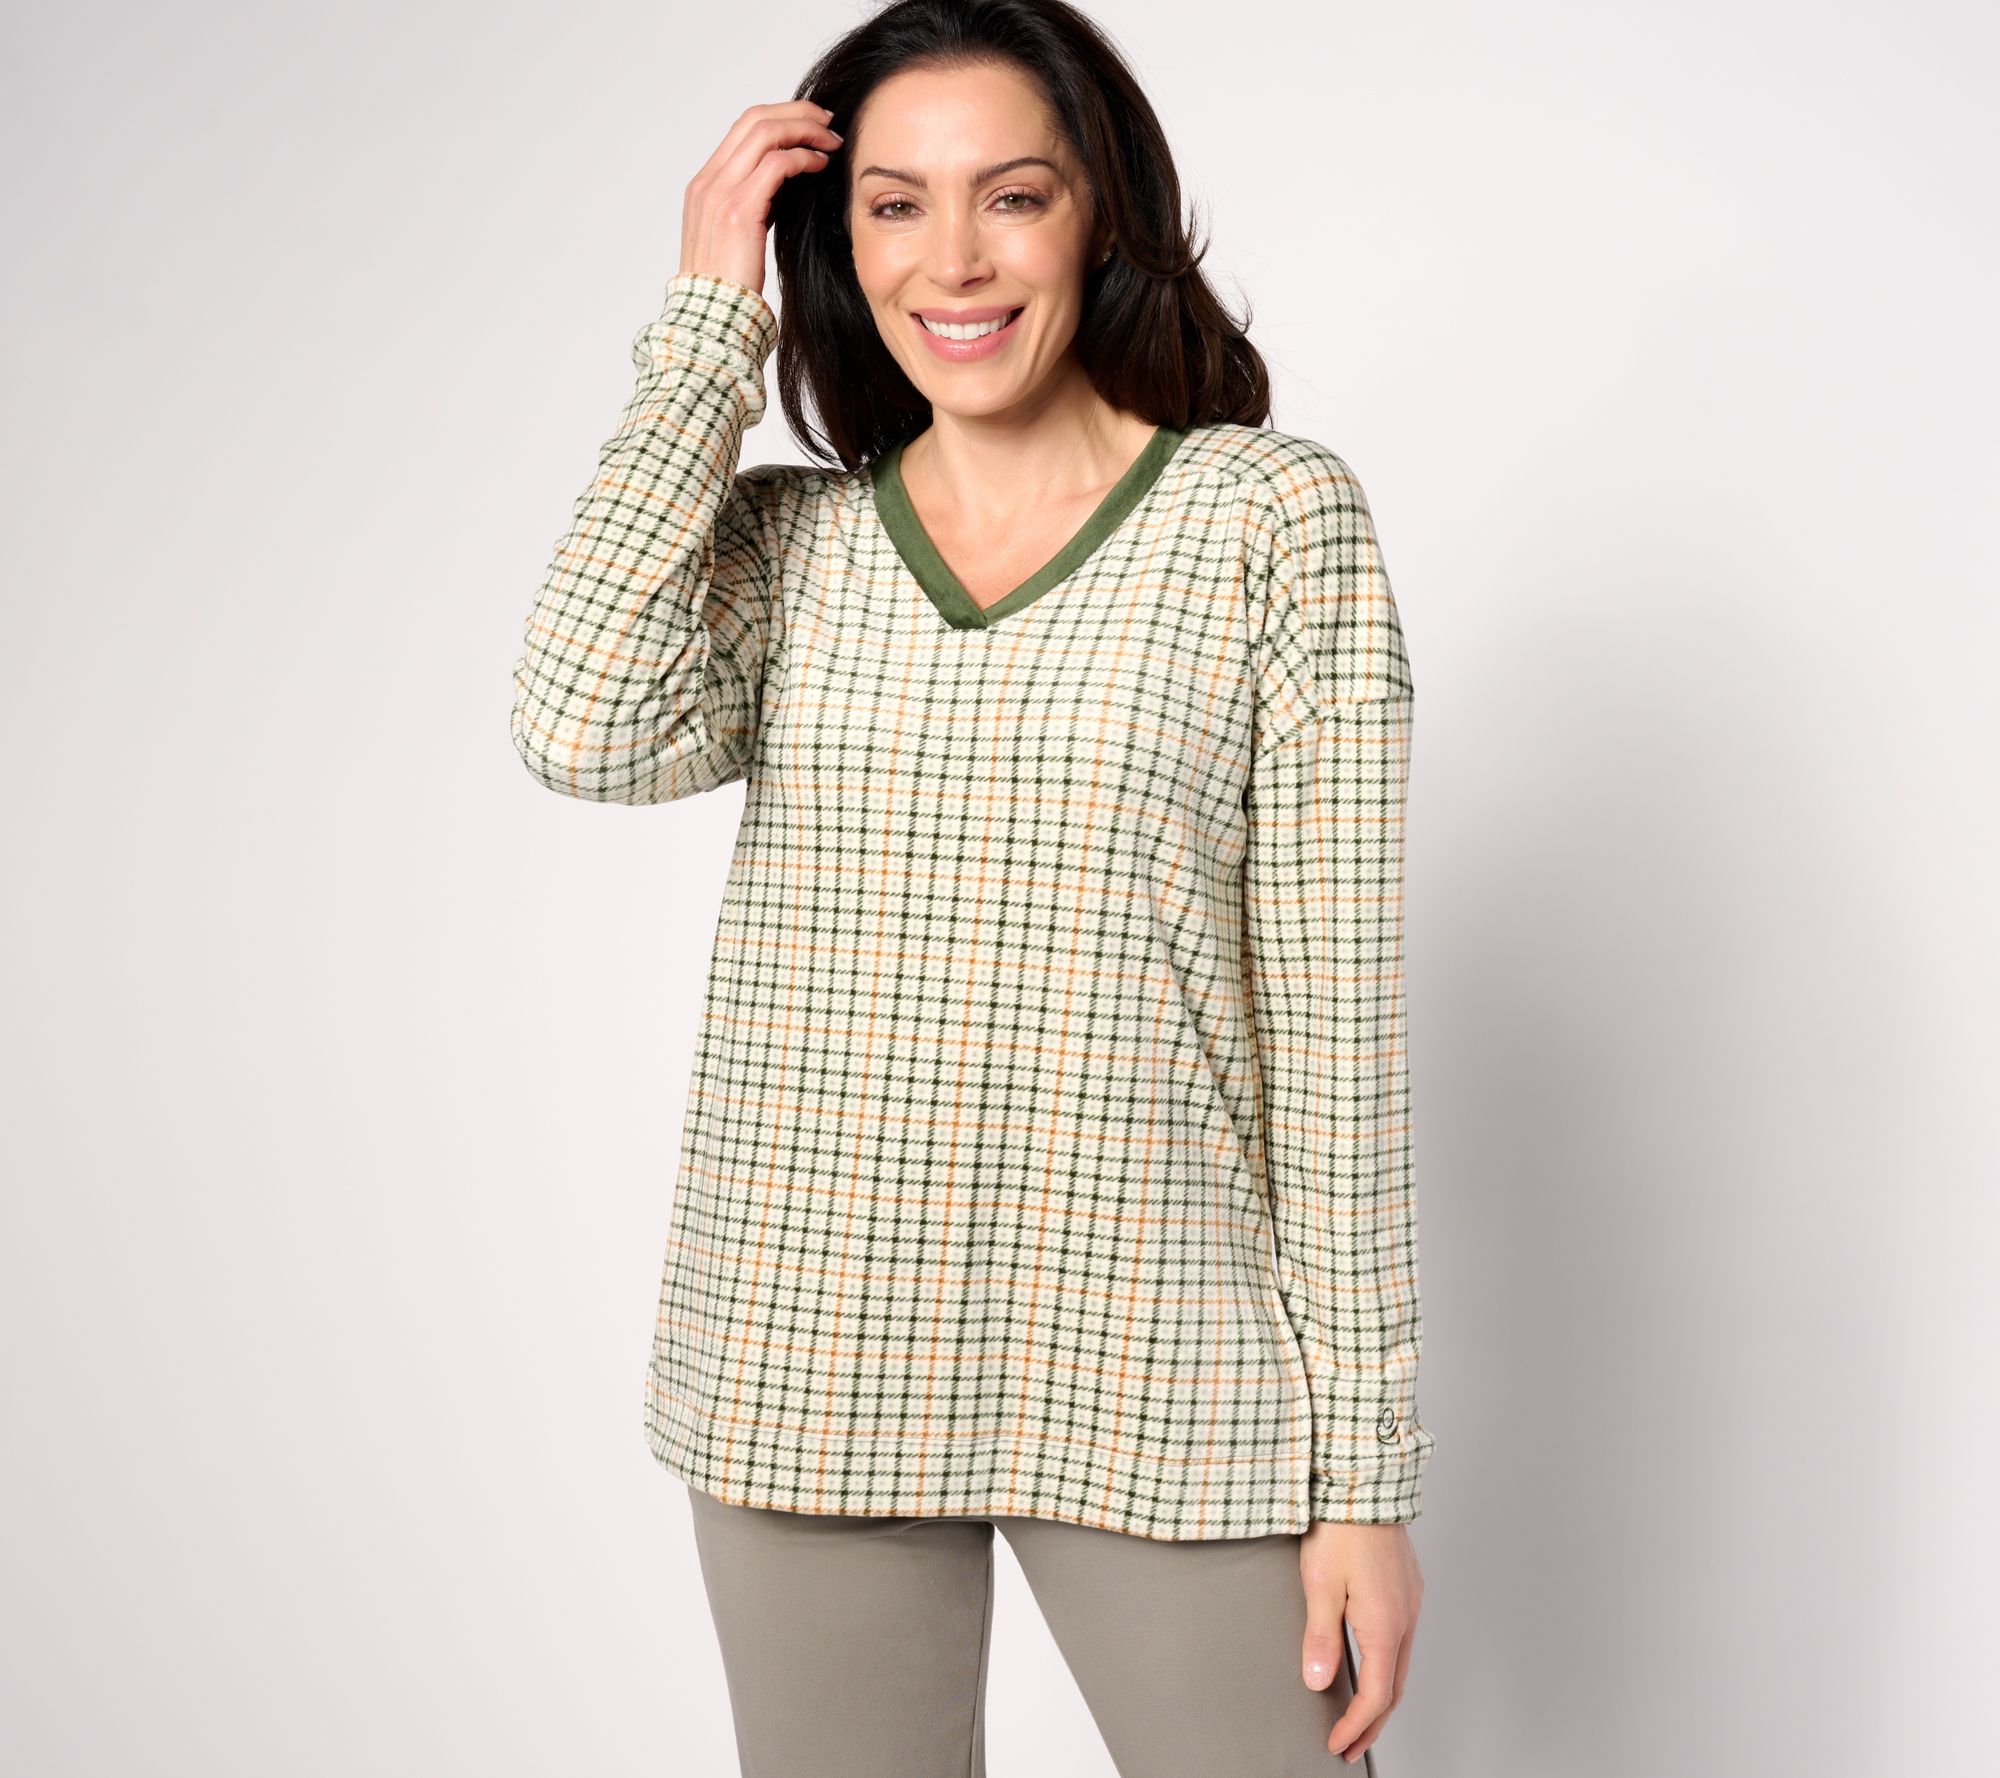 Cuddl Duds One Sleeve Tunic Tops for Women